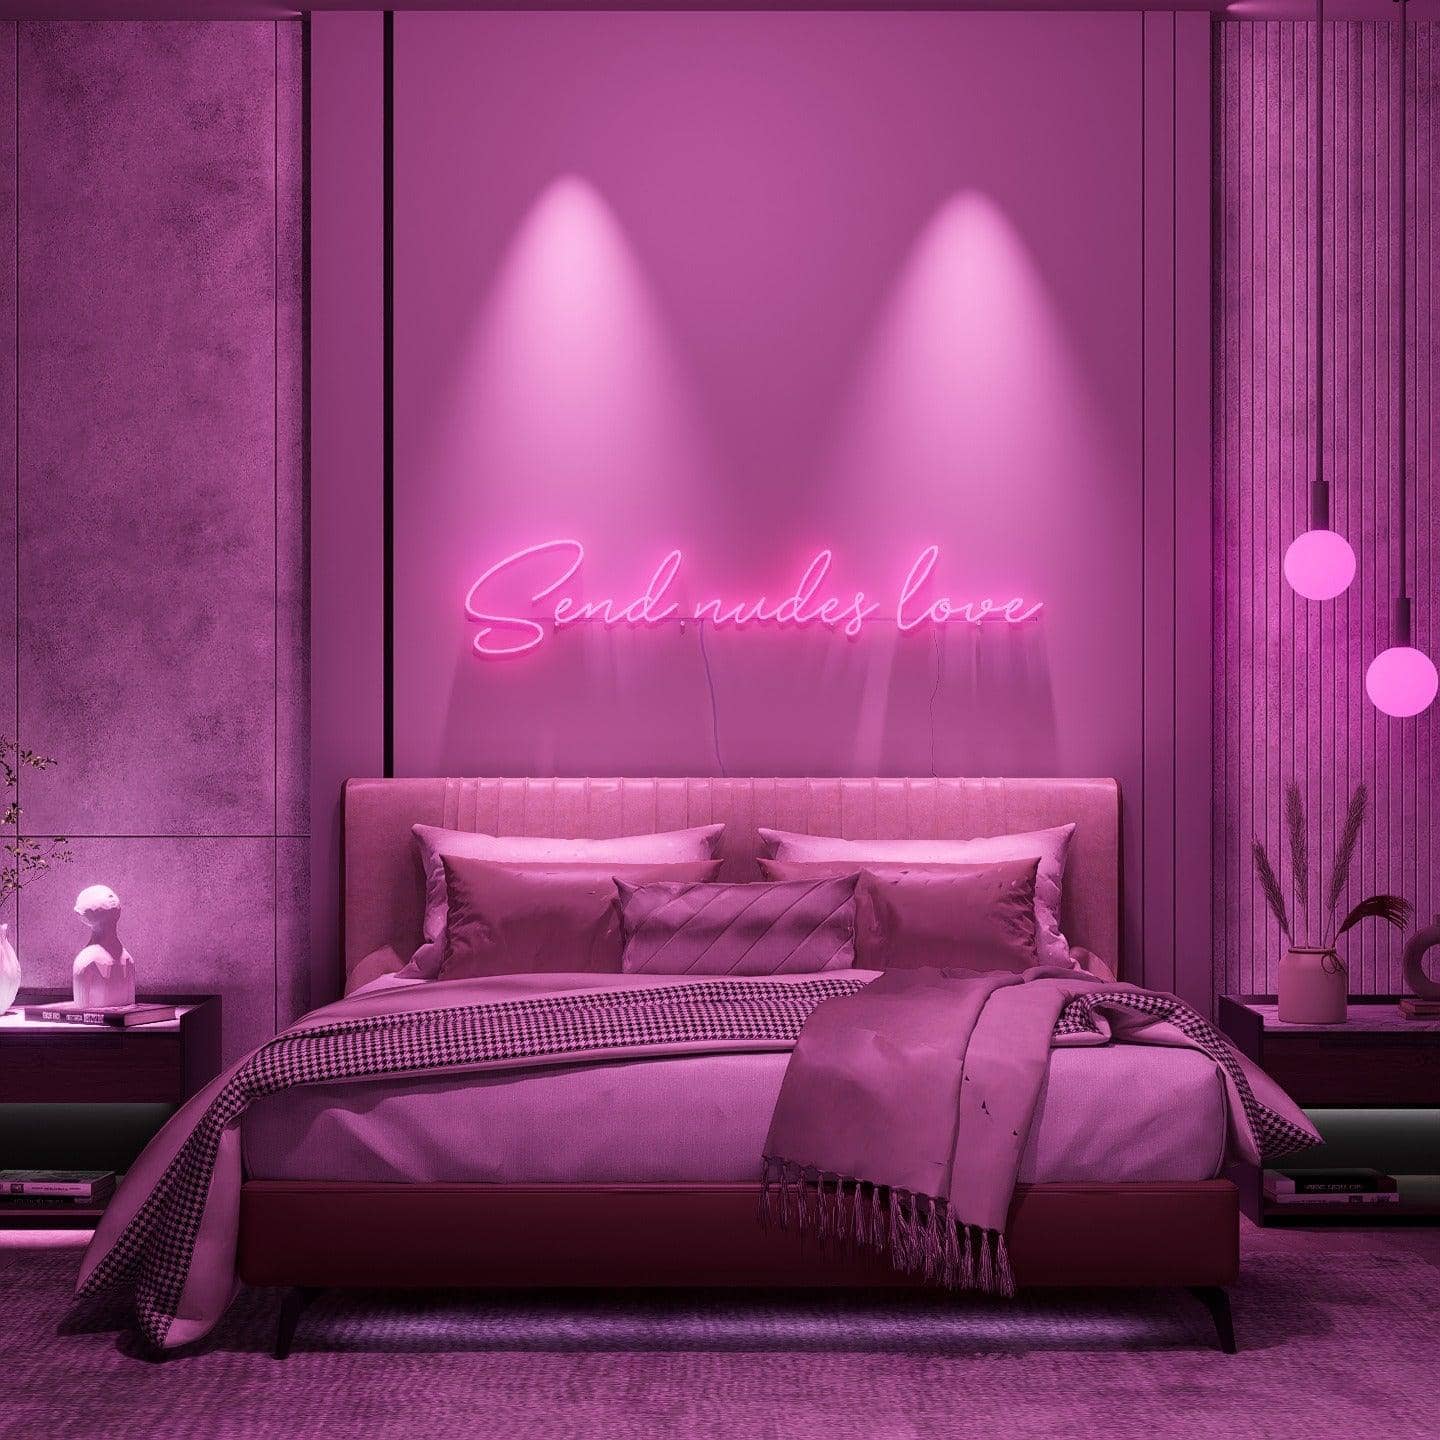 dark-night-lit-pink-neon-lights-hanging-on-the-wall-for-display-send-nudes-love